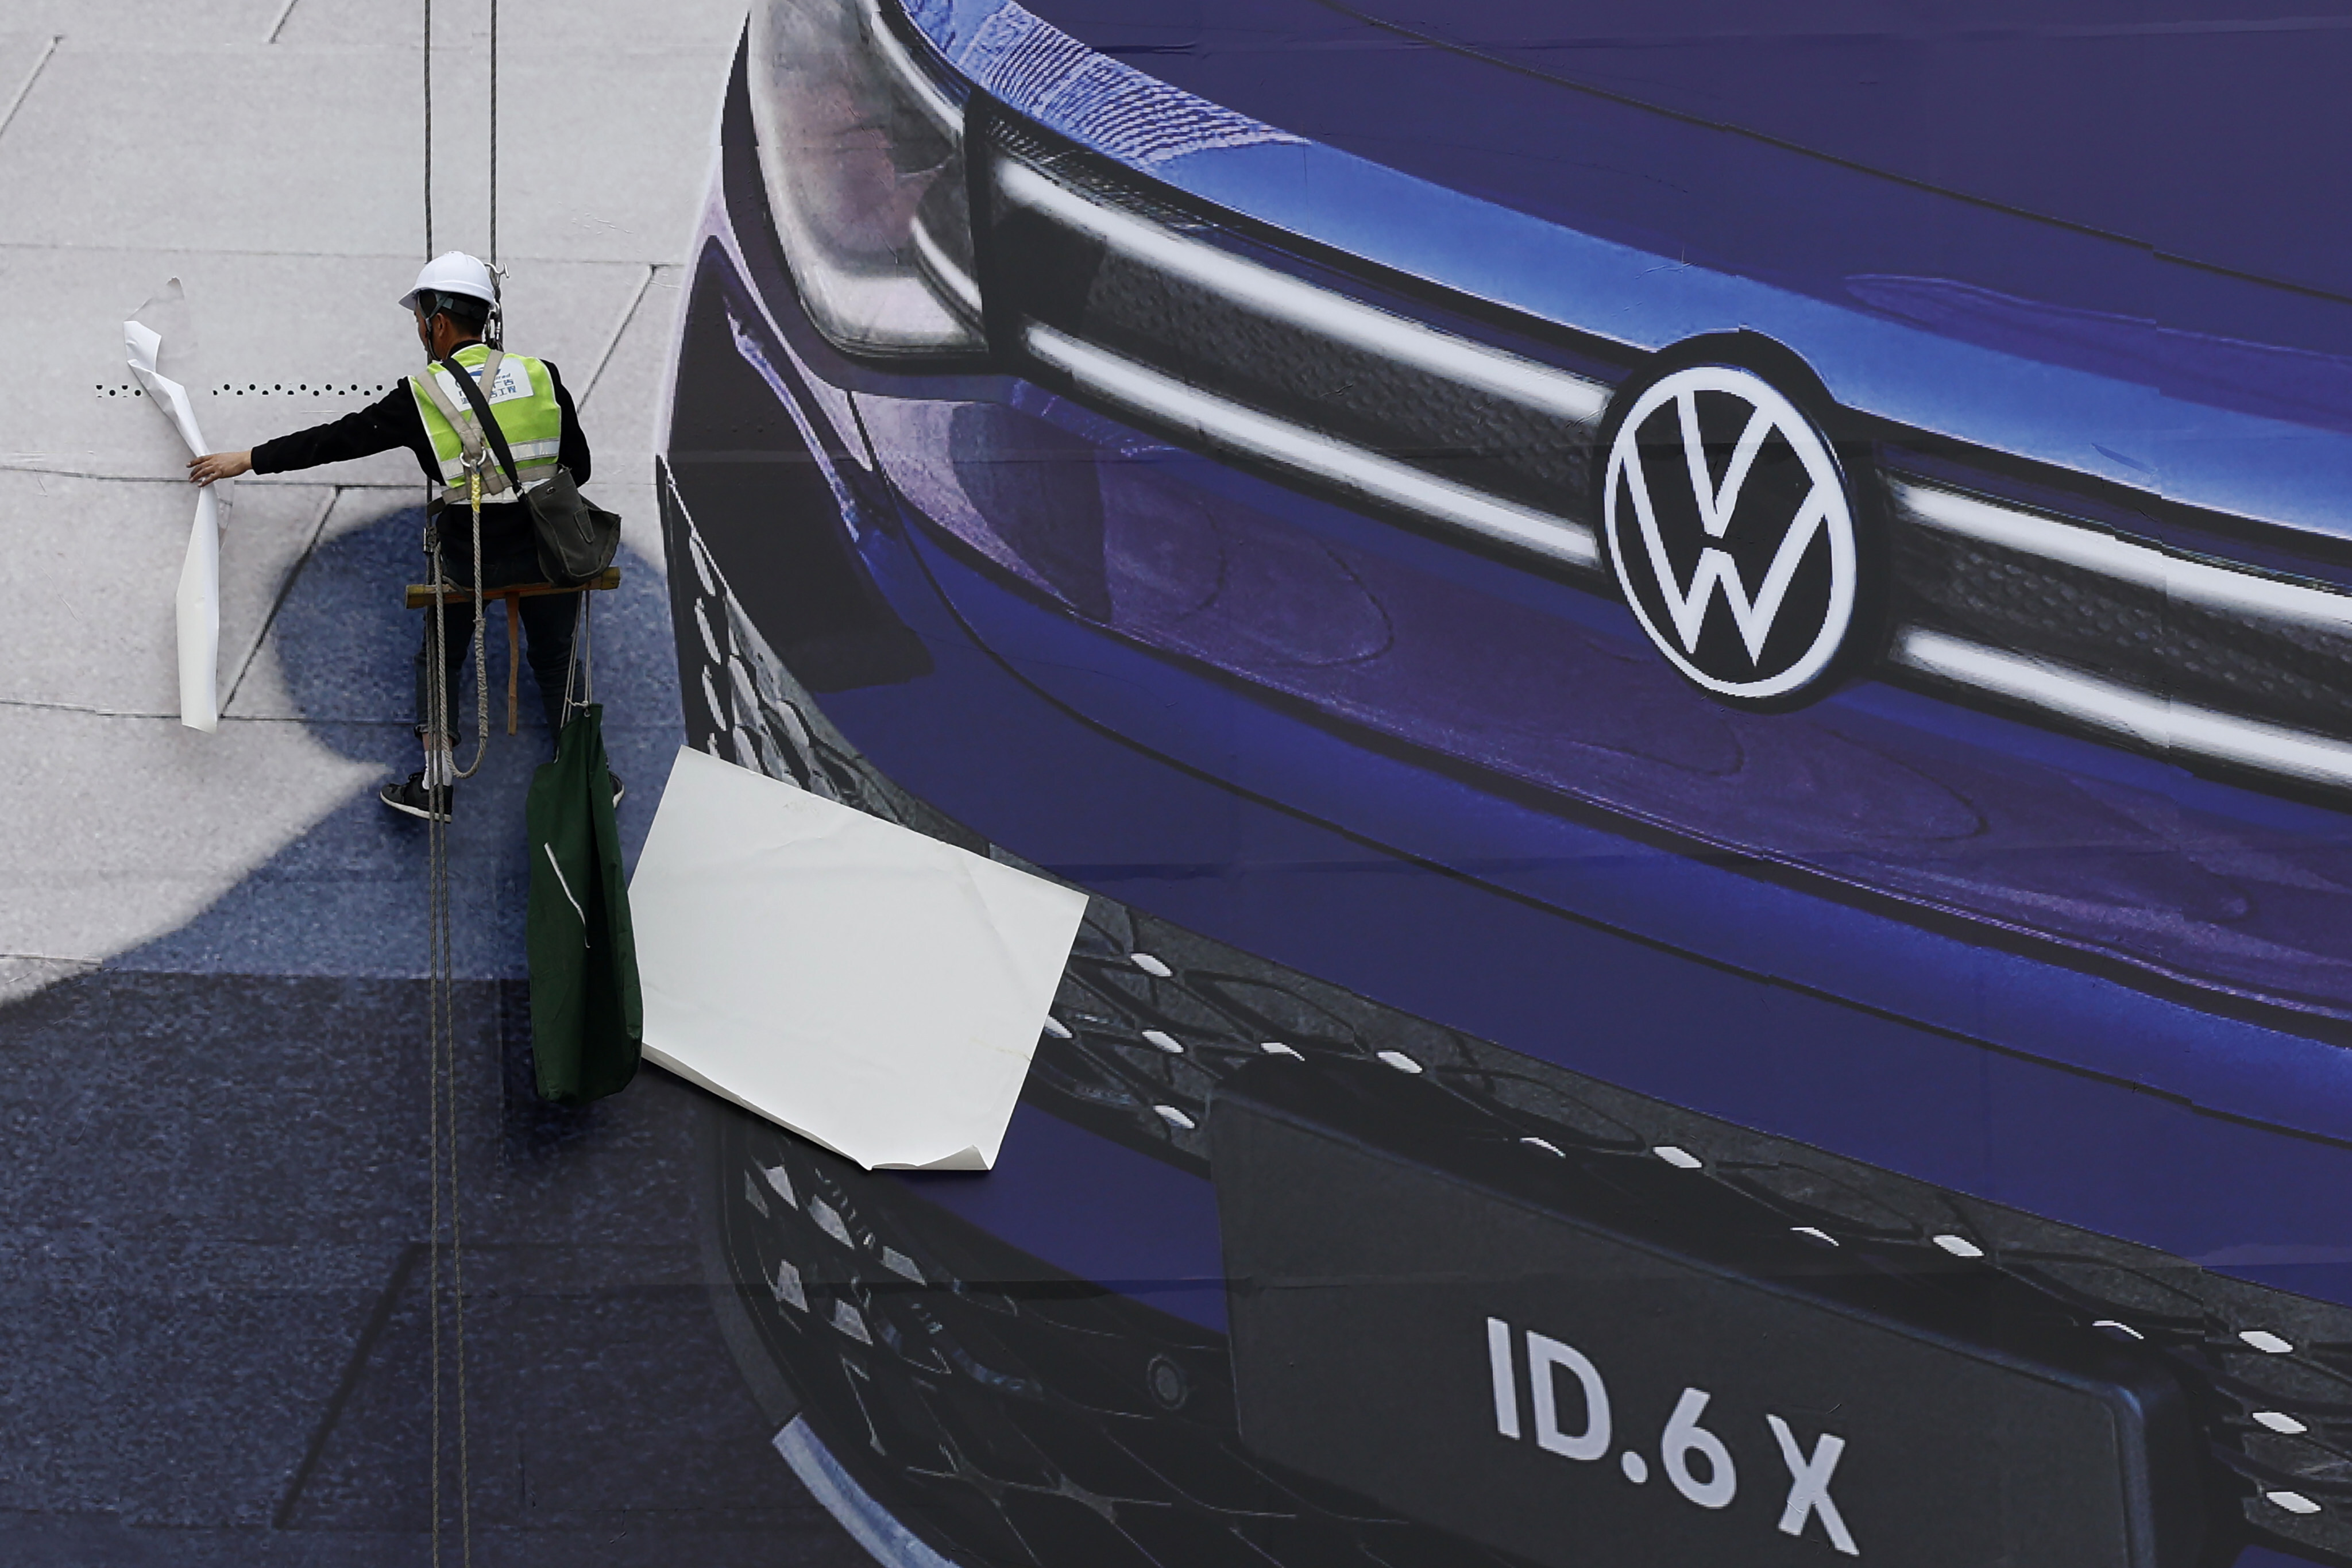 A worker prepares a giant VW billboard ahead of the Auto Shanghai 2021 show in this file photo. Photo: AP